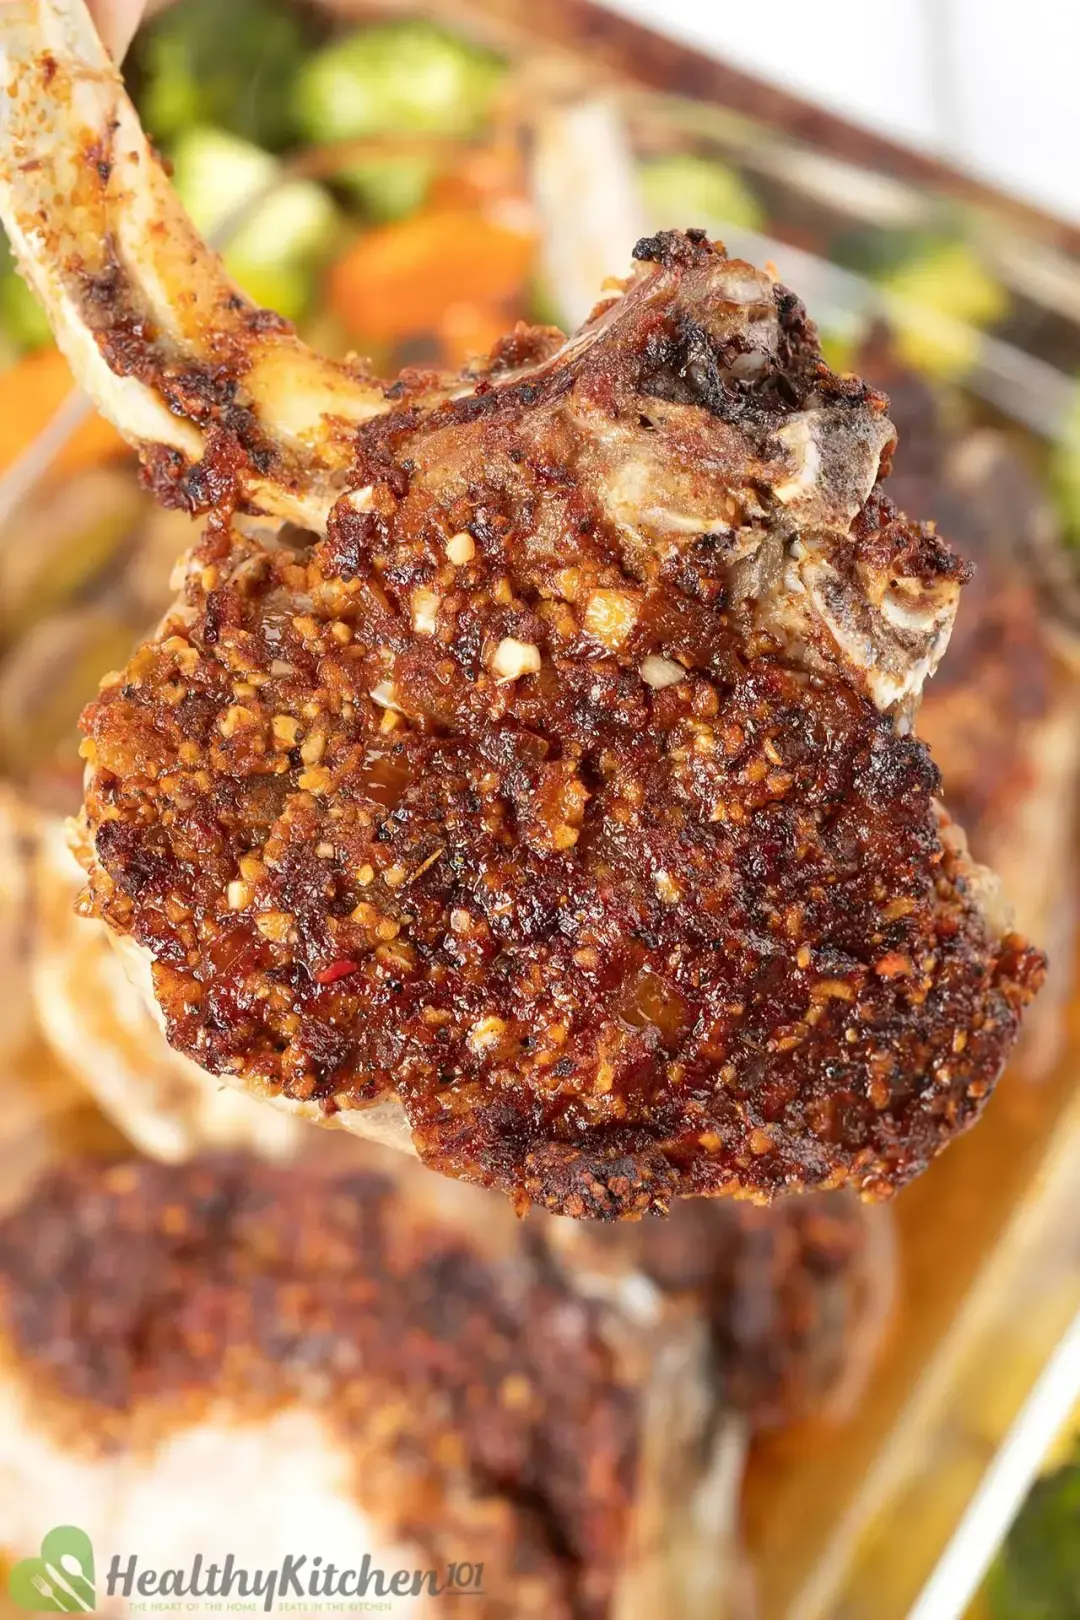 A close-up shot of a roasted pork chop with golden minced garlic and spices on the surface